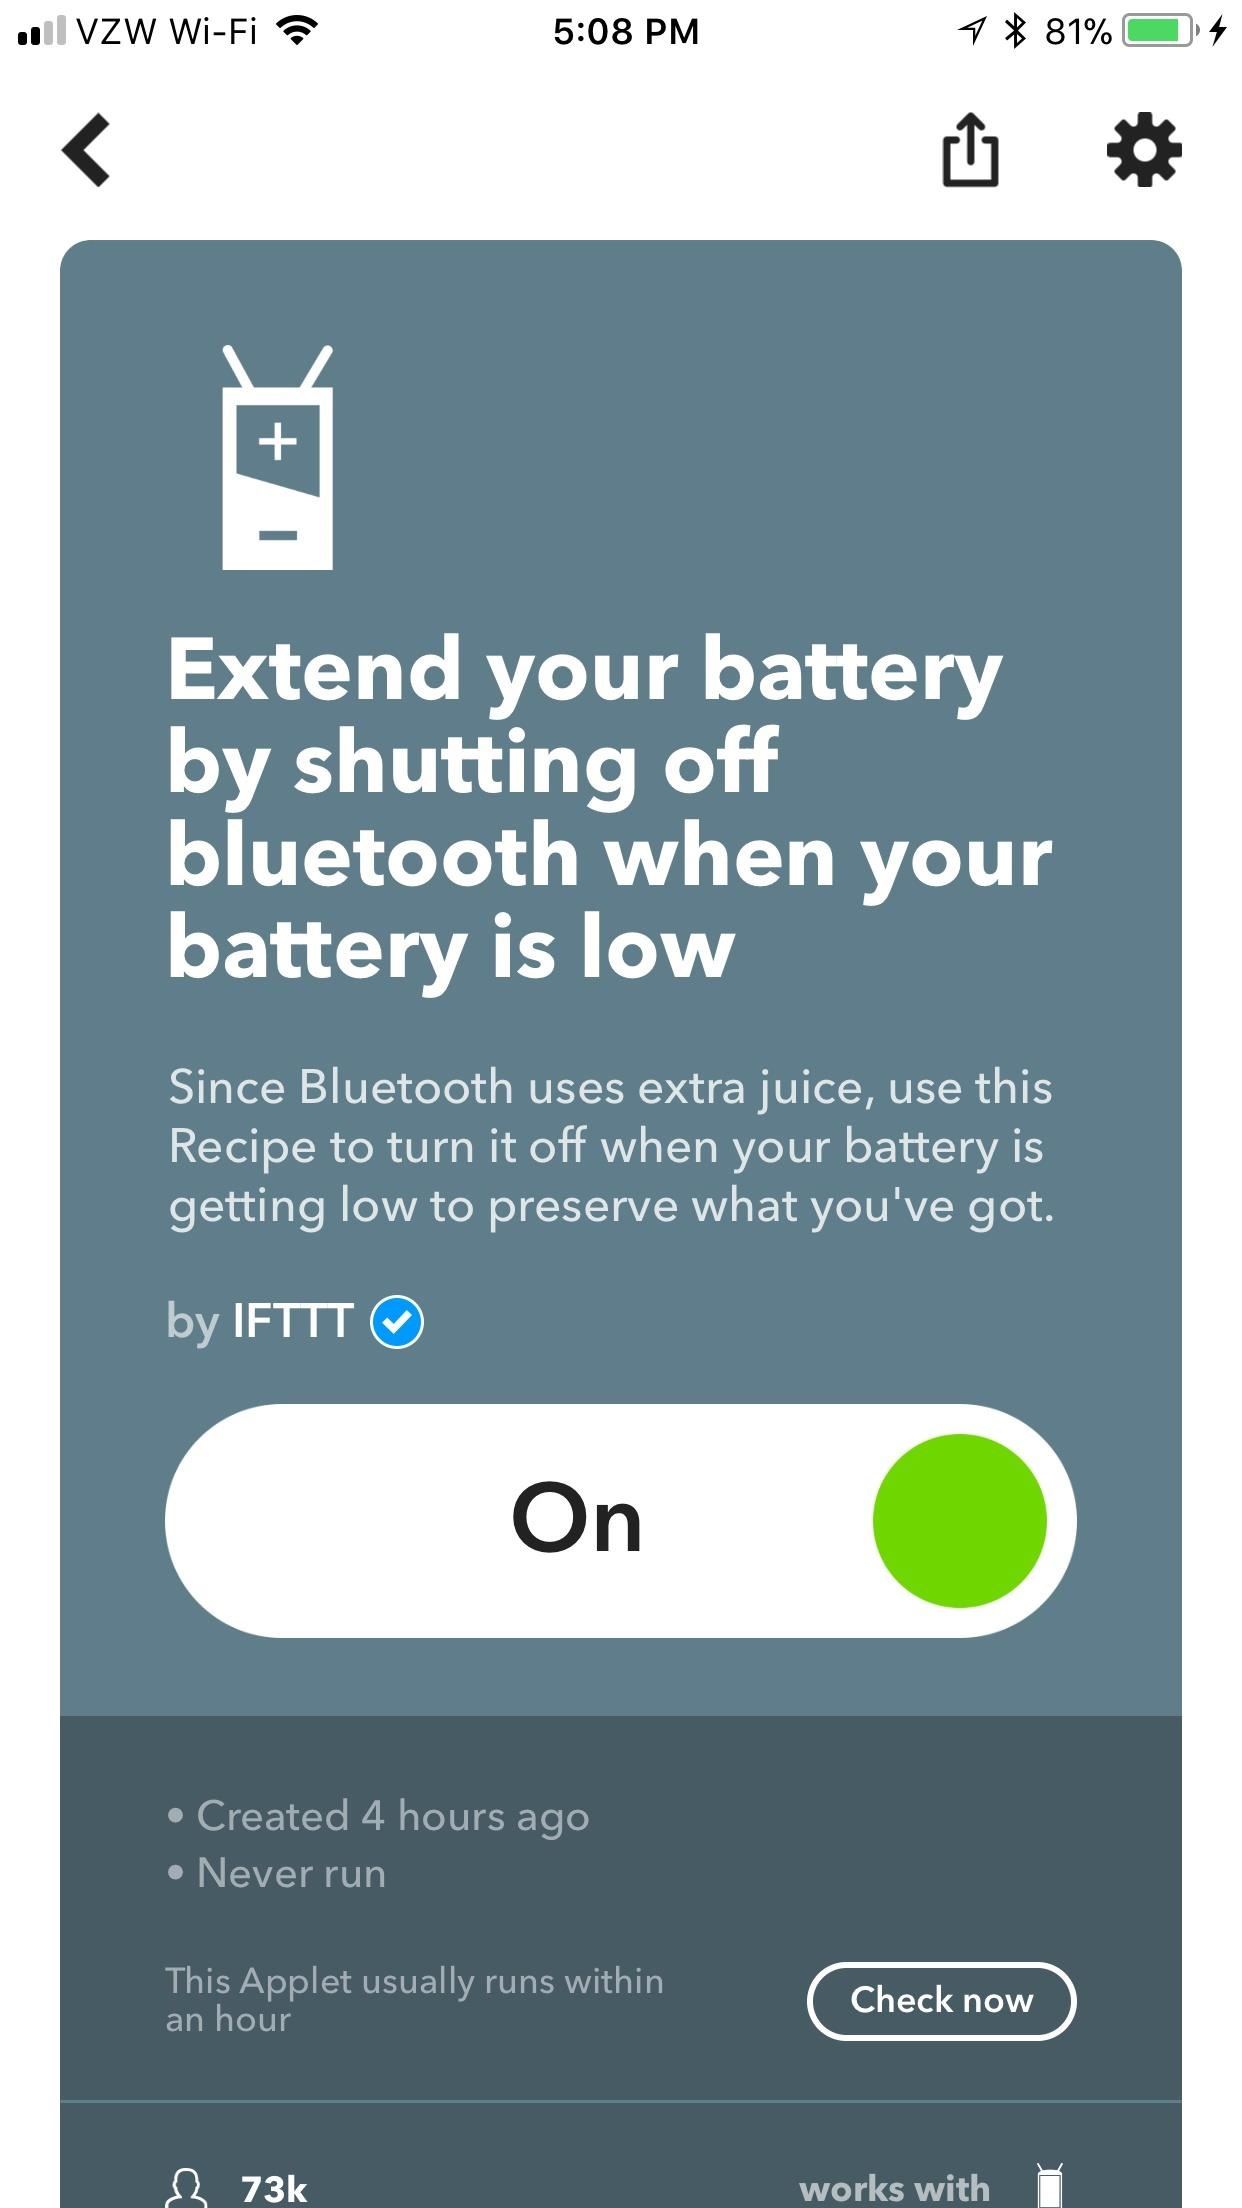 IFTTT 101: 8 Useful Applets to Help You Get Started with Smartphone Automation